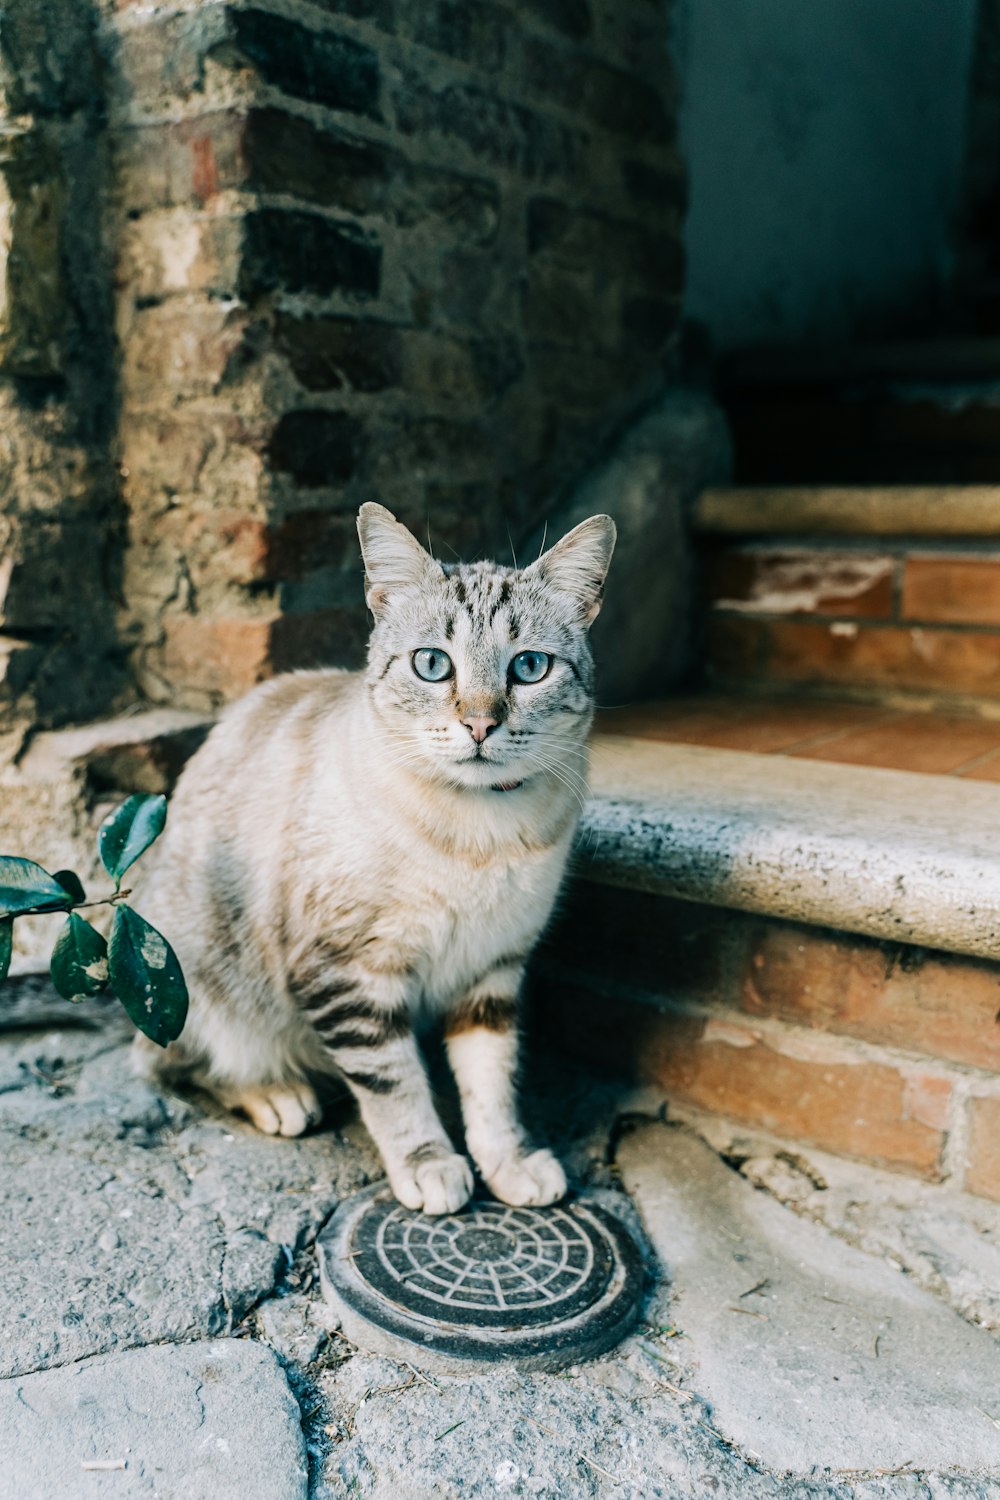 a cat sitting on the steps of a building